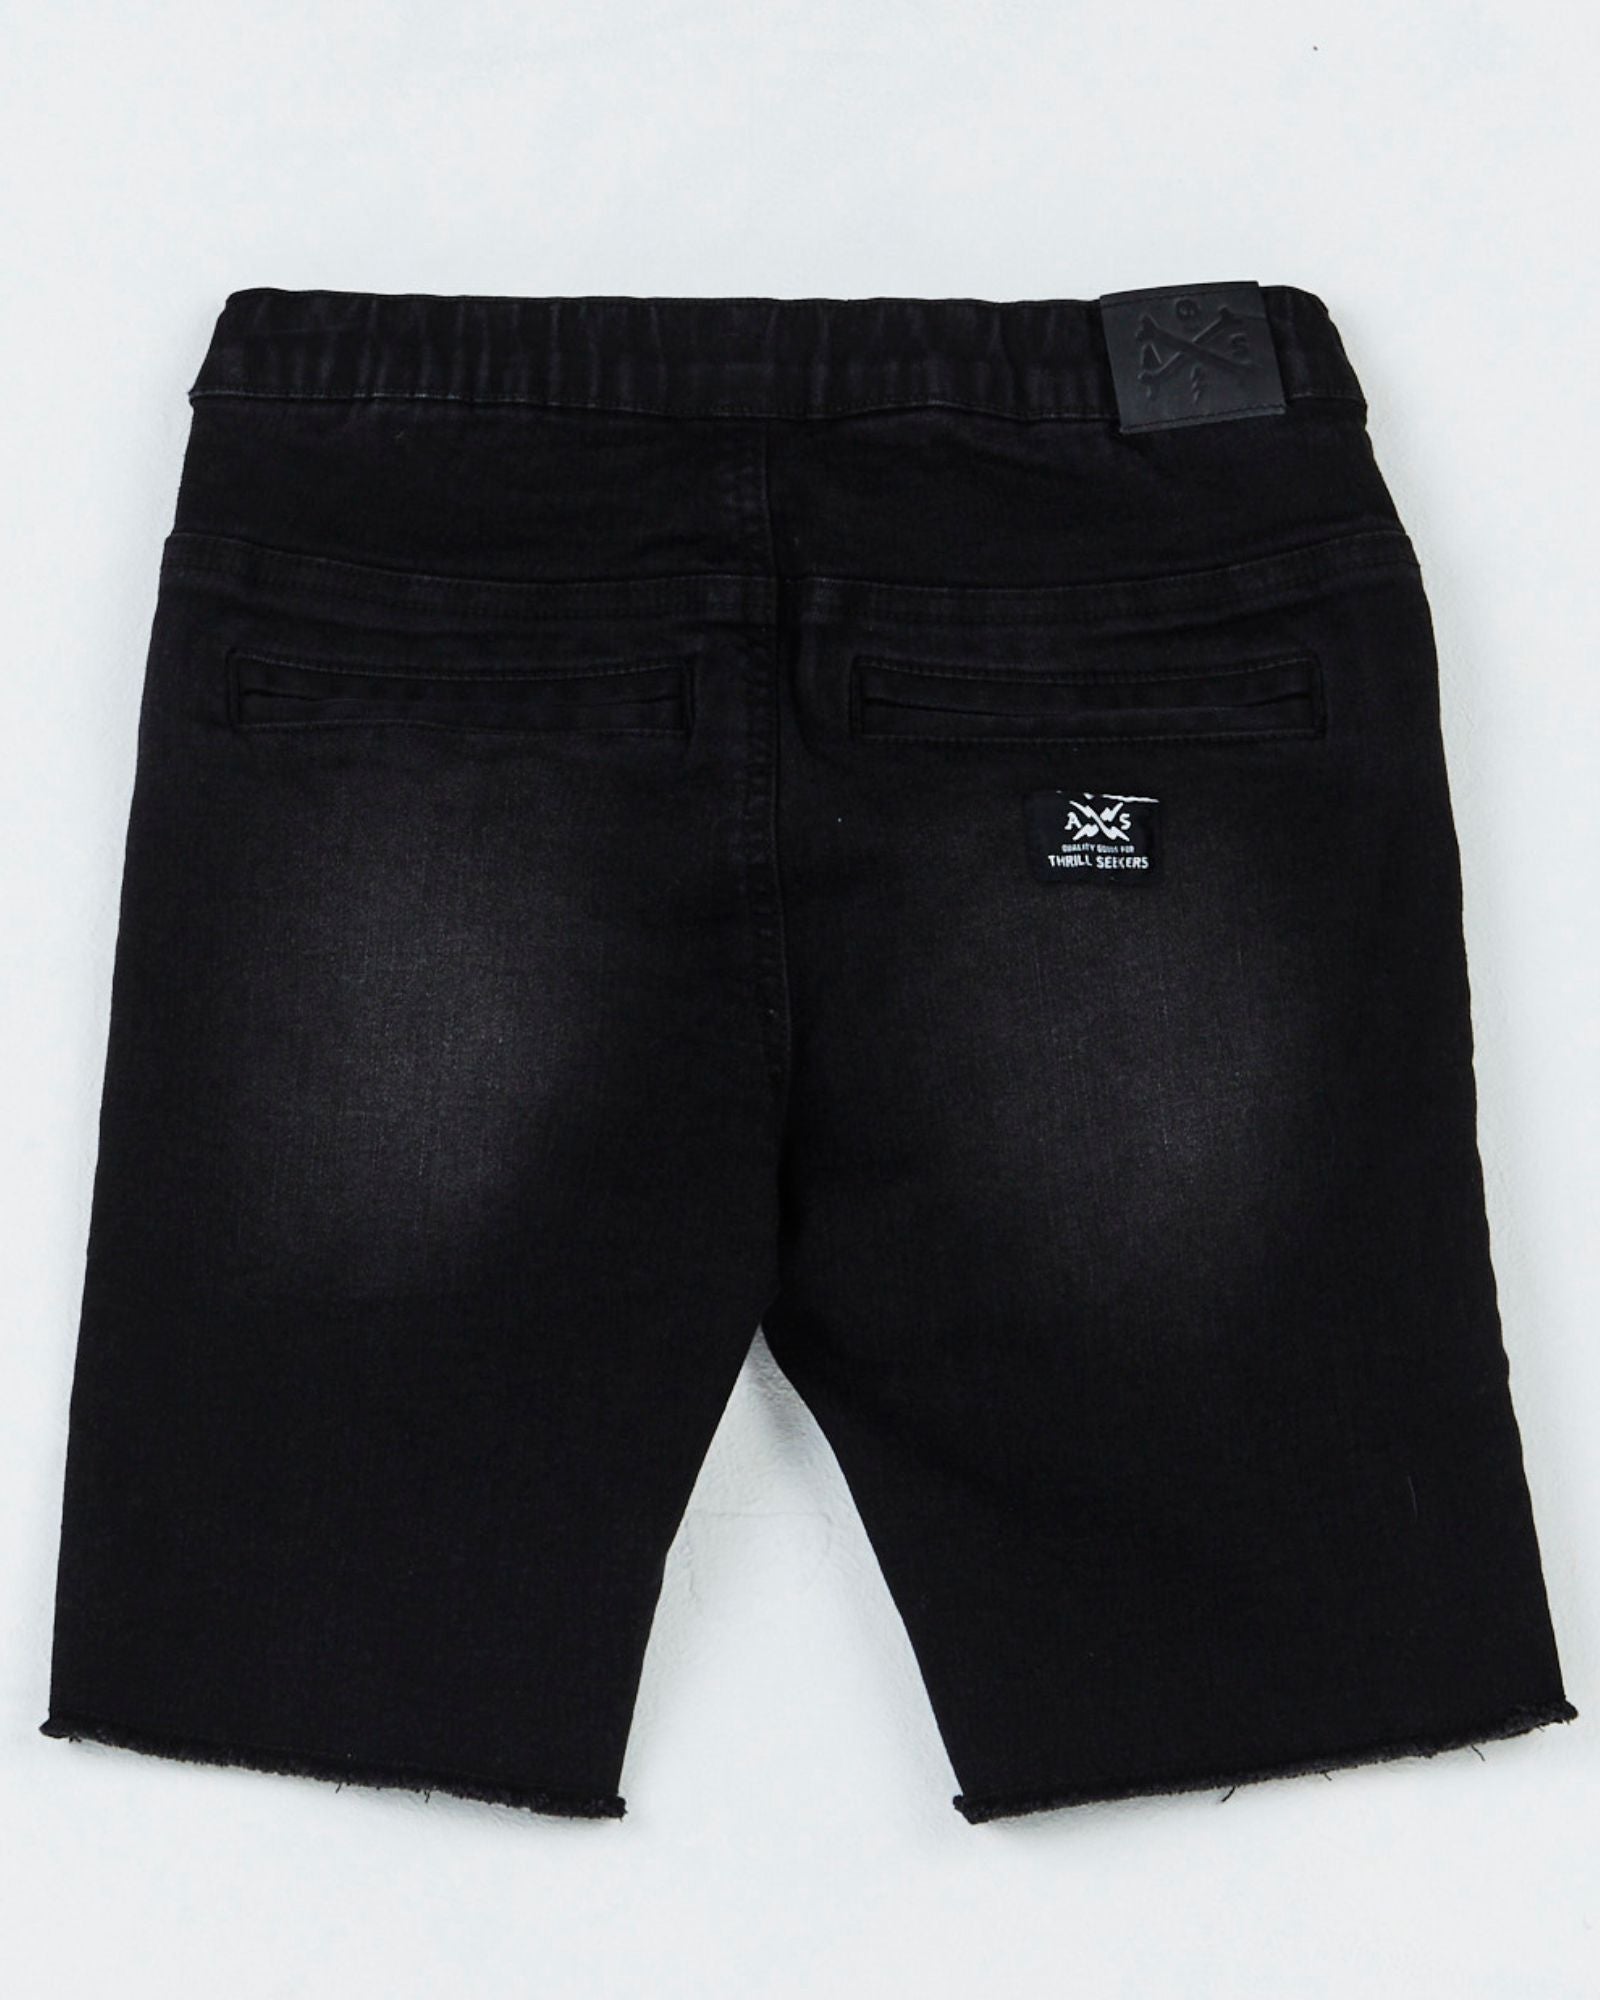 Alphabet Soup's Teen Reckless Denim Jogg Jean Shorts for boys aged 8-16. Crafted from stretch knit denim and vintage black, perfect for any marathon of adventure. Relaxed fit, elasticated waist, five pocket design.